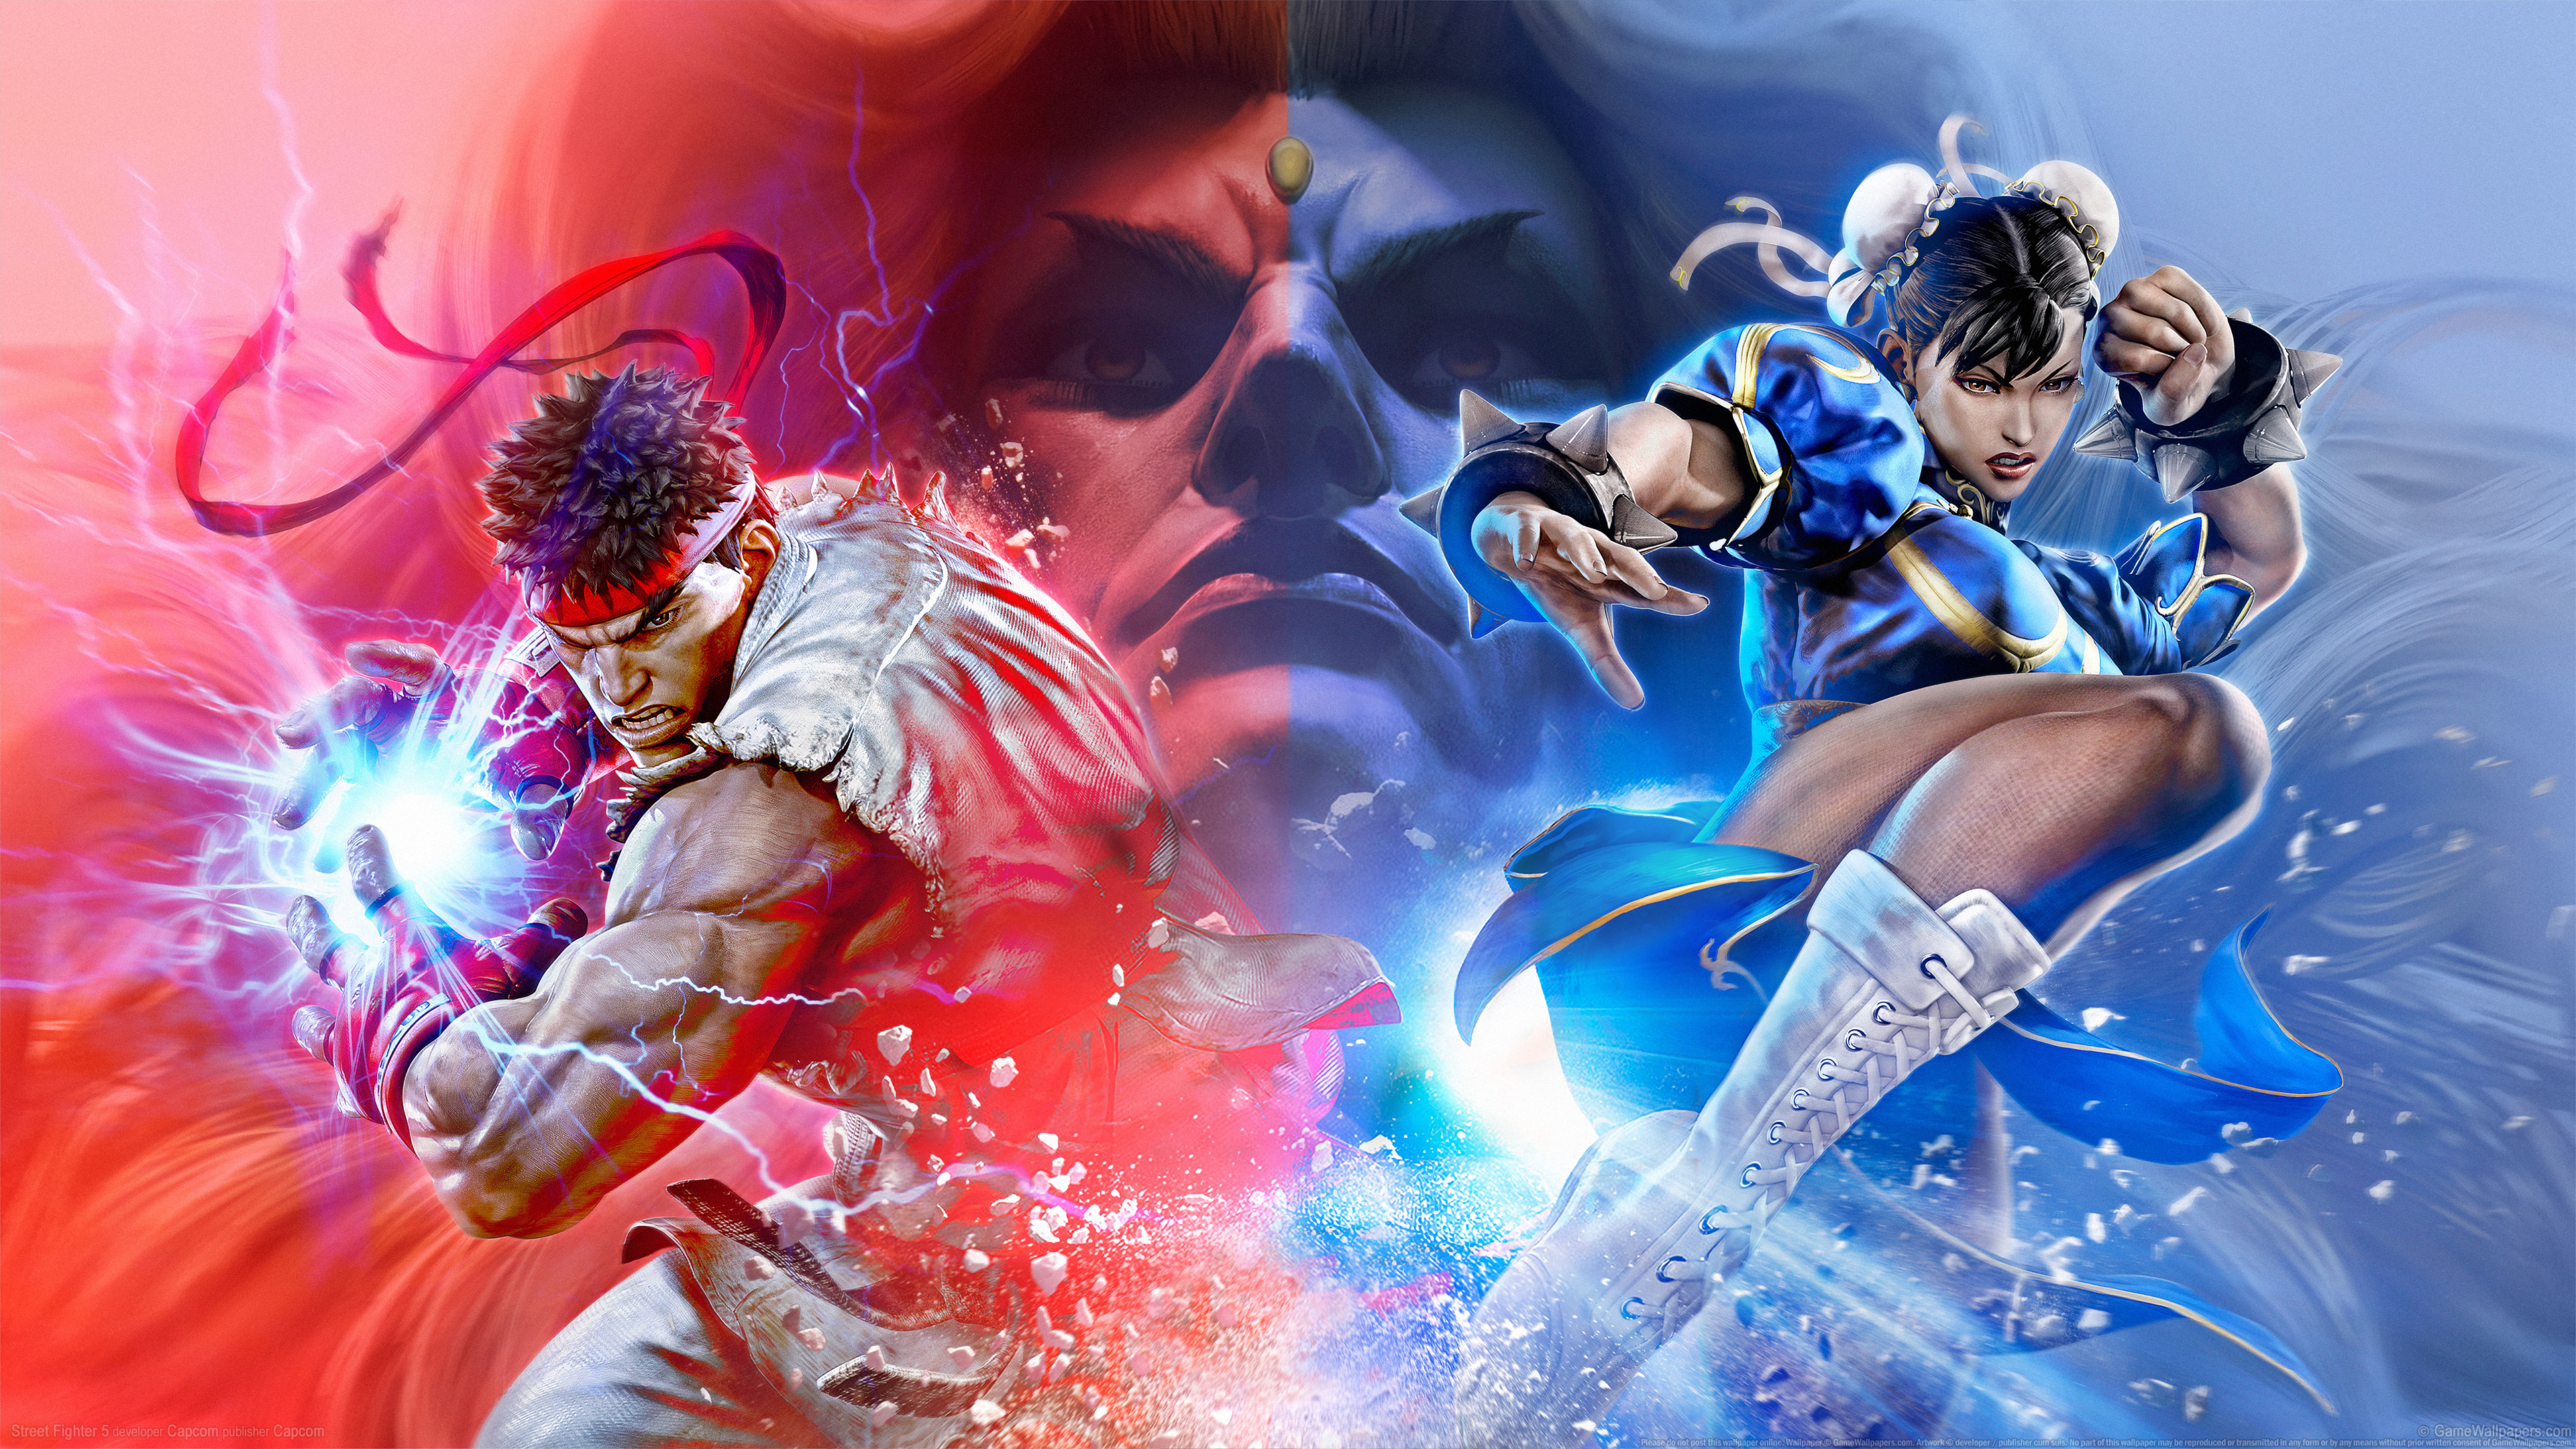 Street Fighter 5 3840x2160 wallpaper or background 08